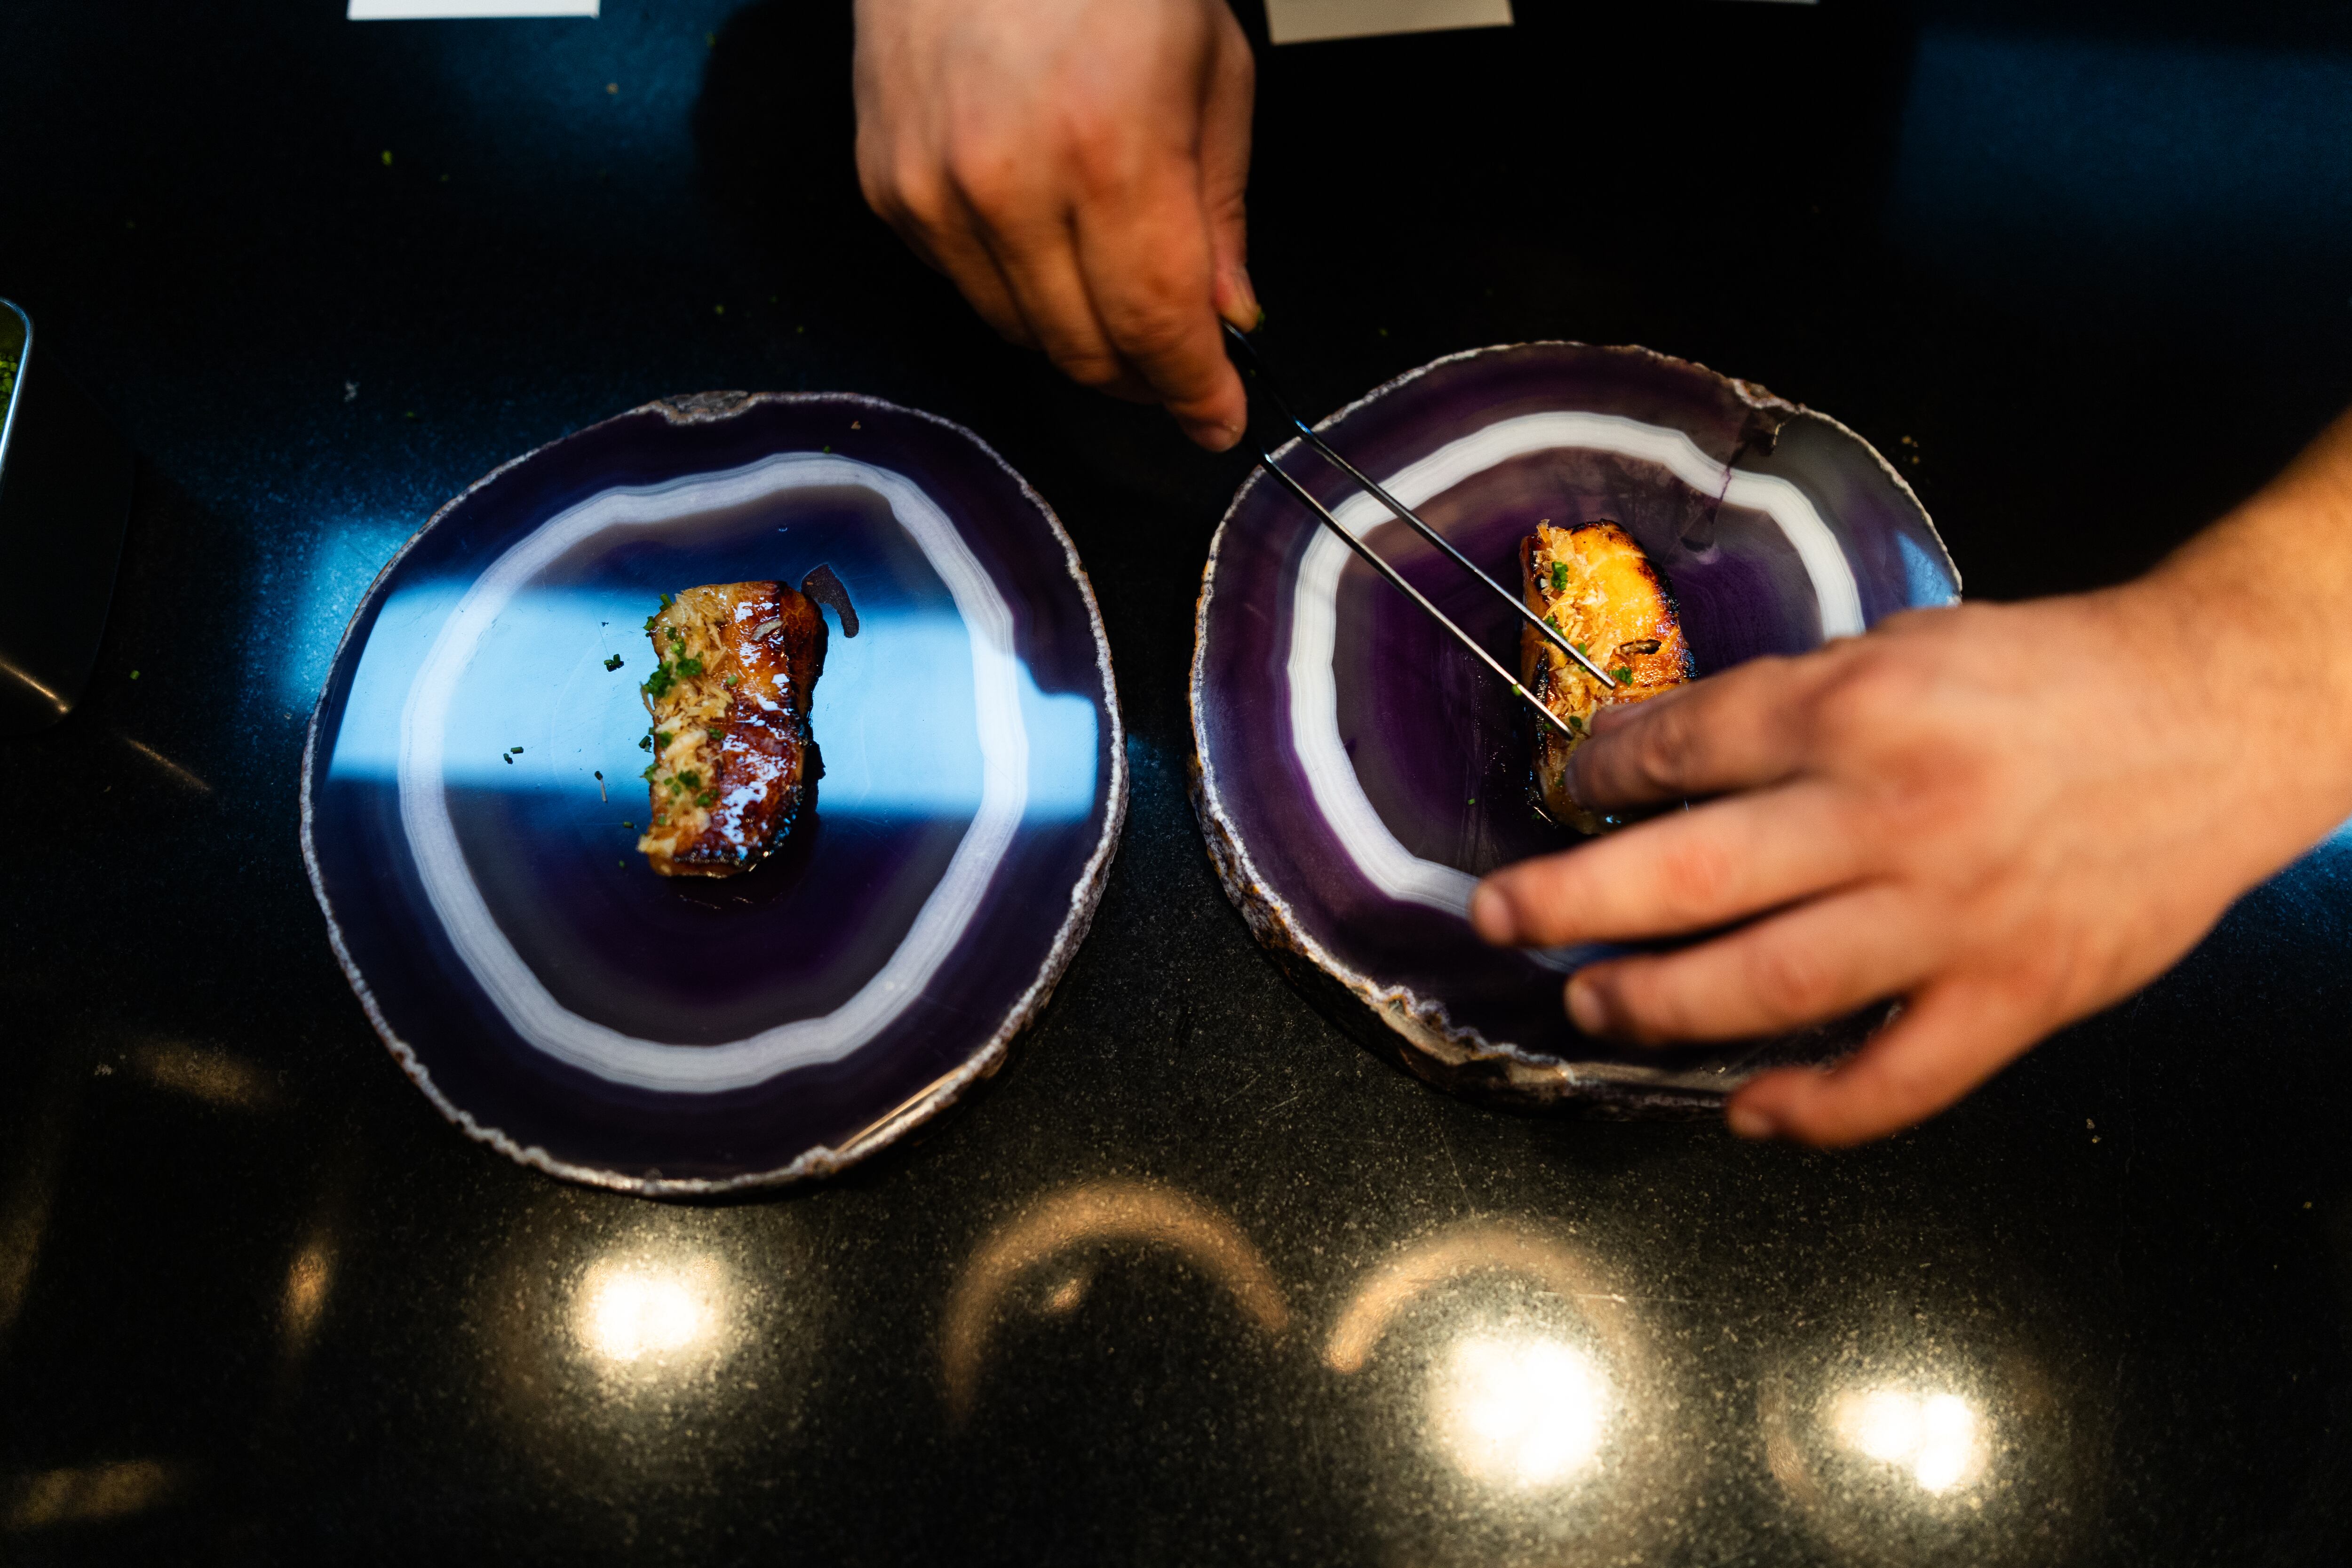 A cook puts the finishing touches on a dish at Maido restaurant in Lima, Peru.